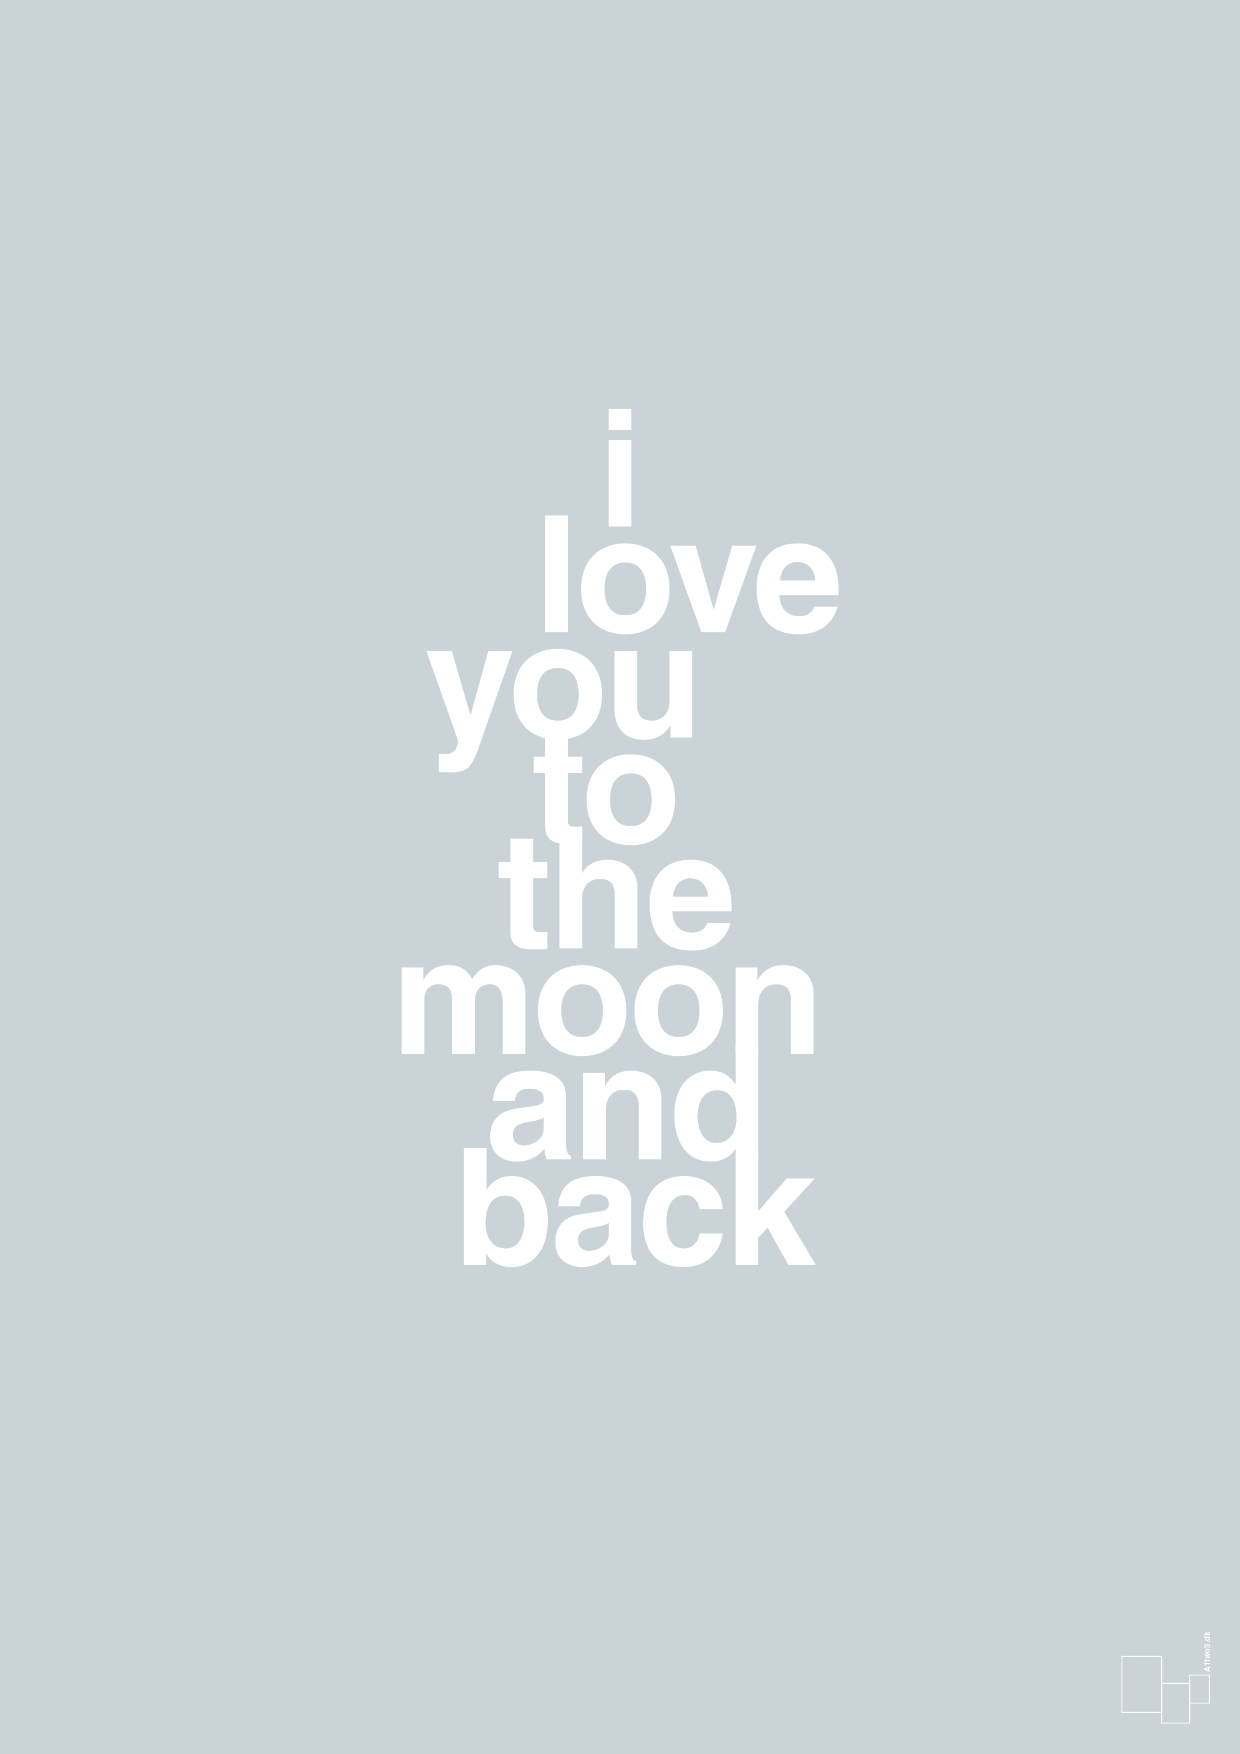 i love you to the moon and back - Plakat med Ordsprog i Light Drizzle